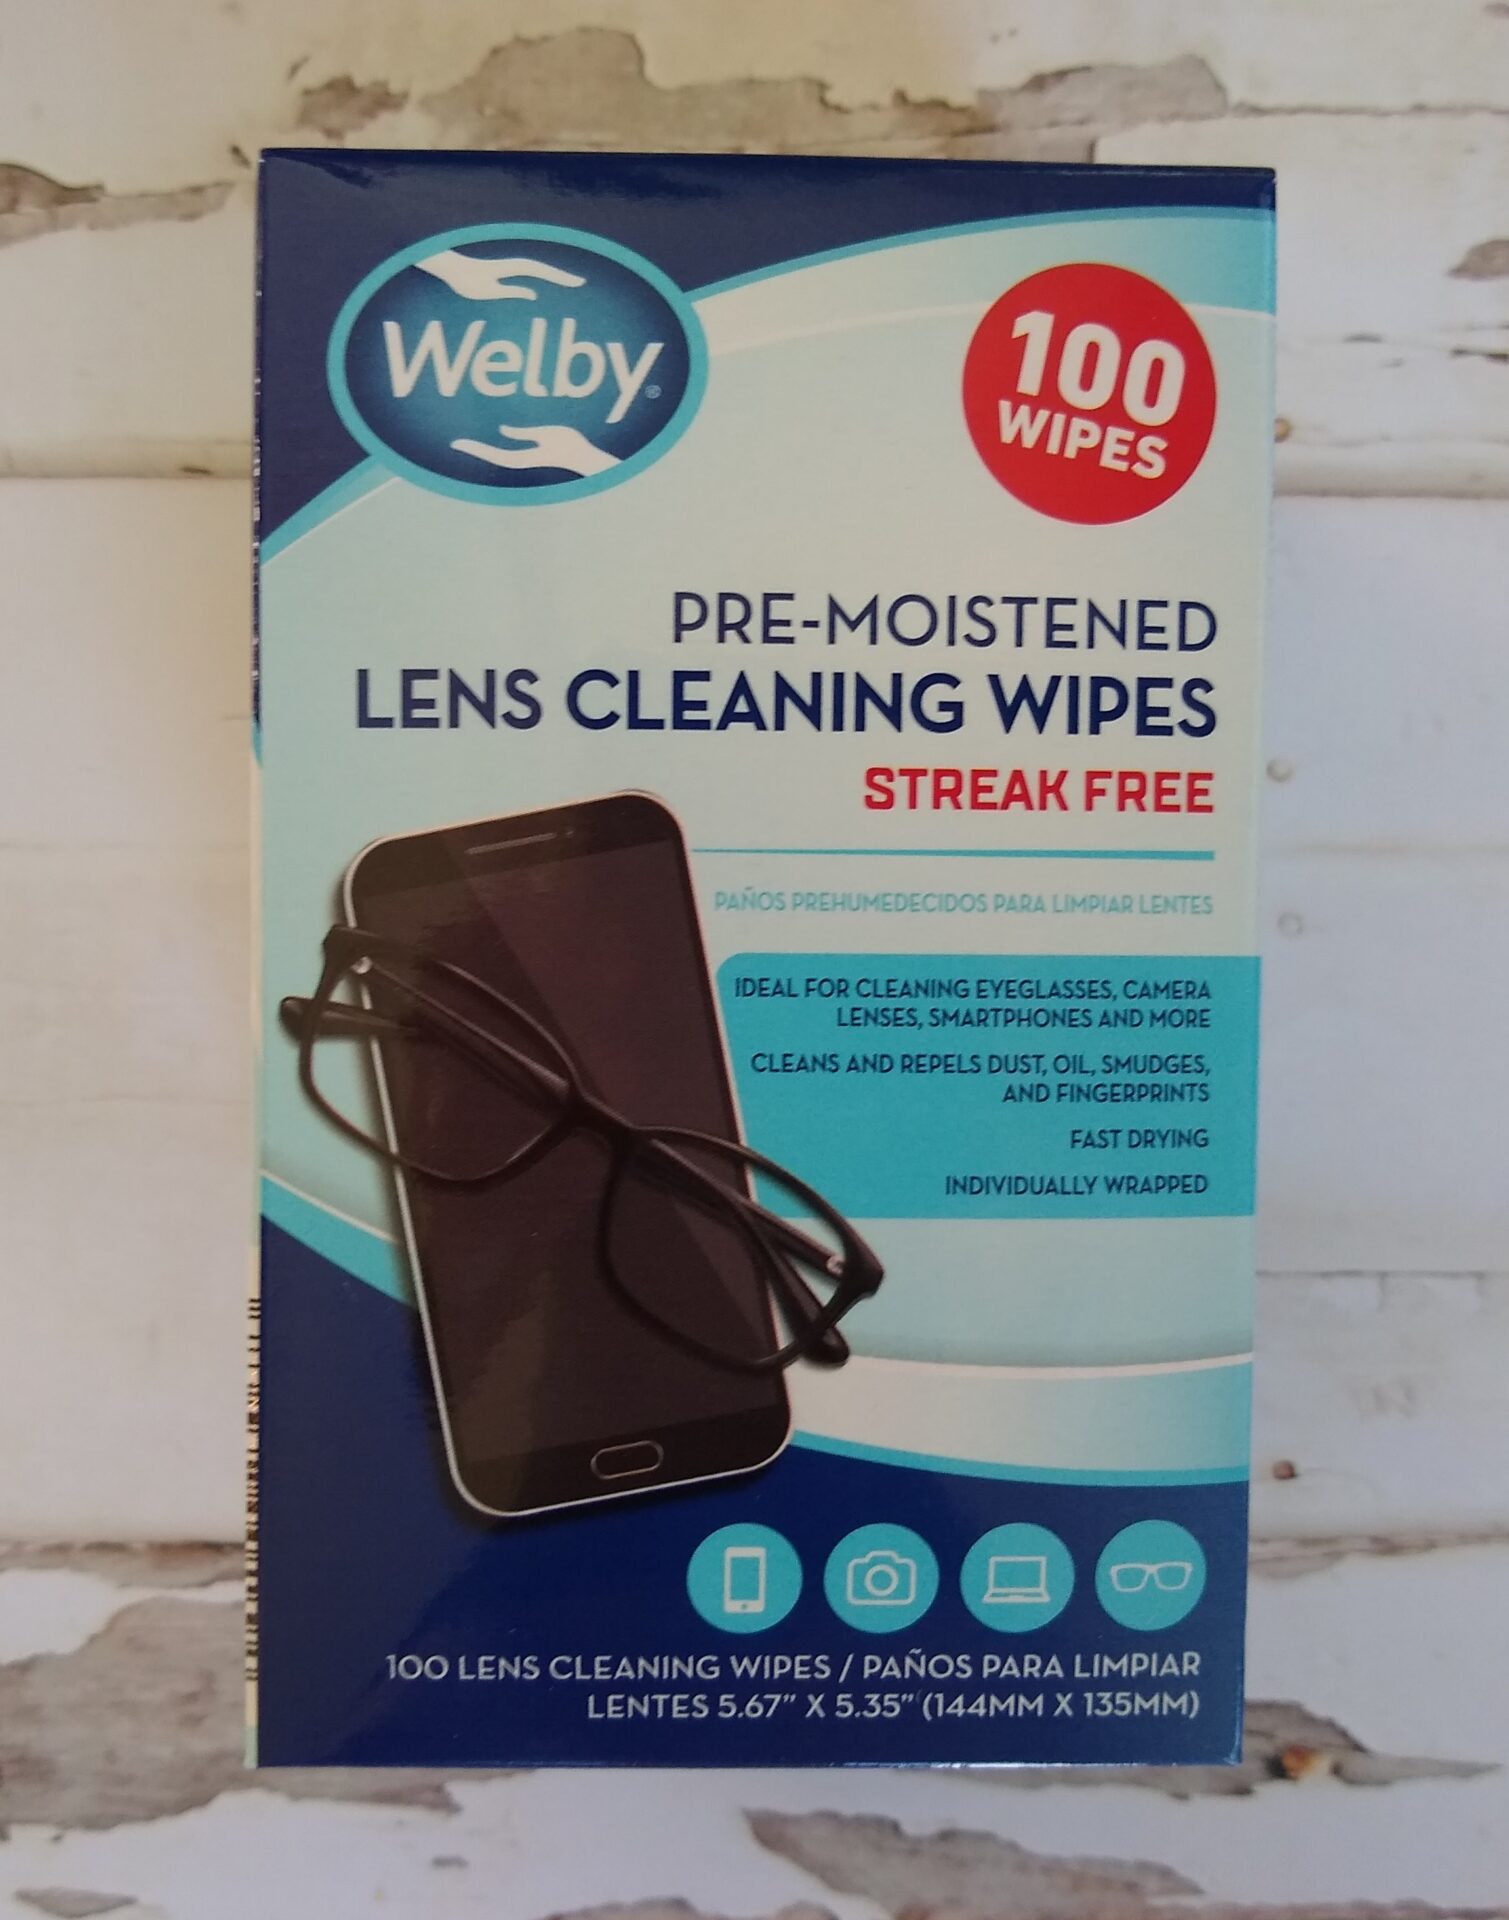 Welby Pre-Moistened Lens Cleaning Wipes